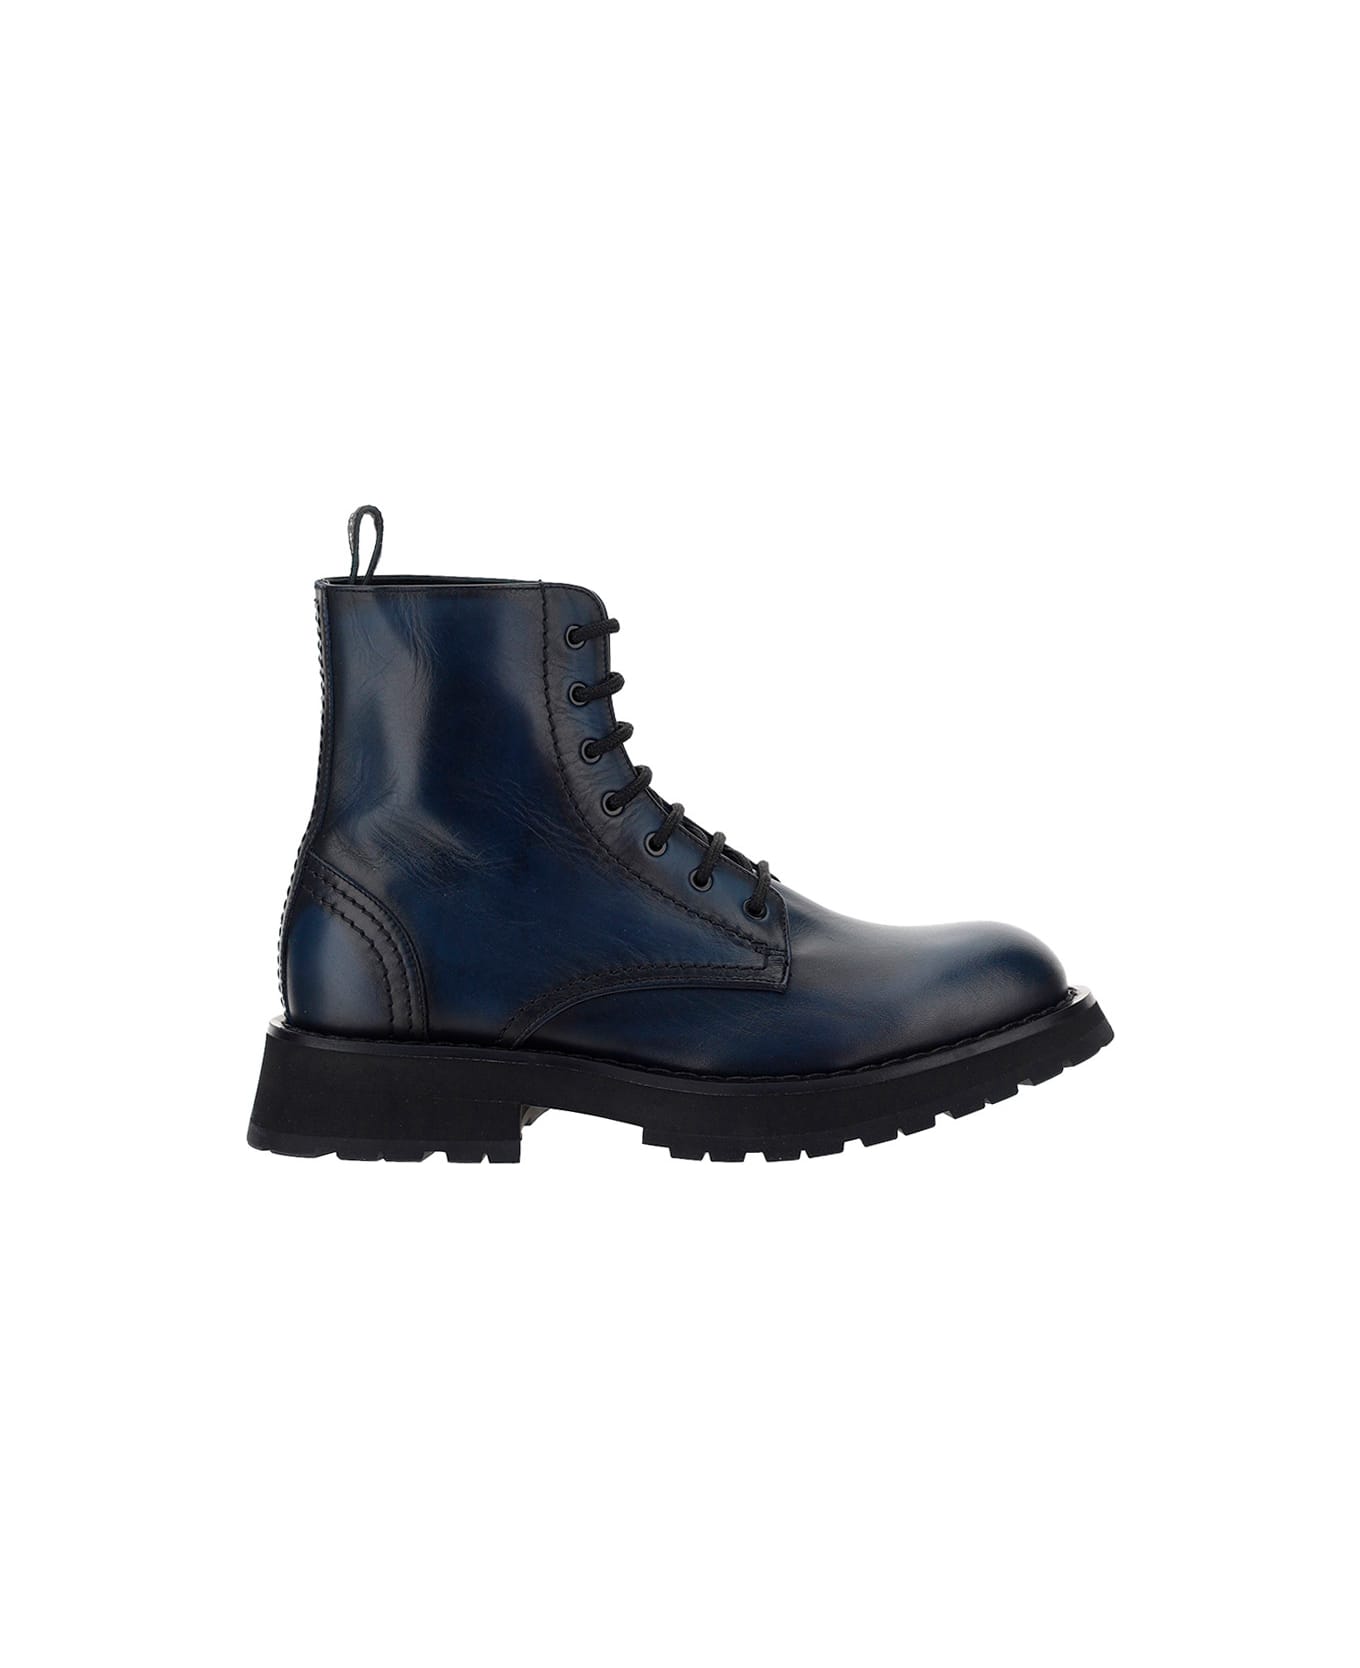 Alexander McQueen Ankle Boots - Anthracite/anthracite